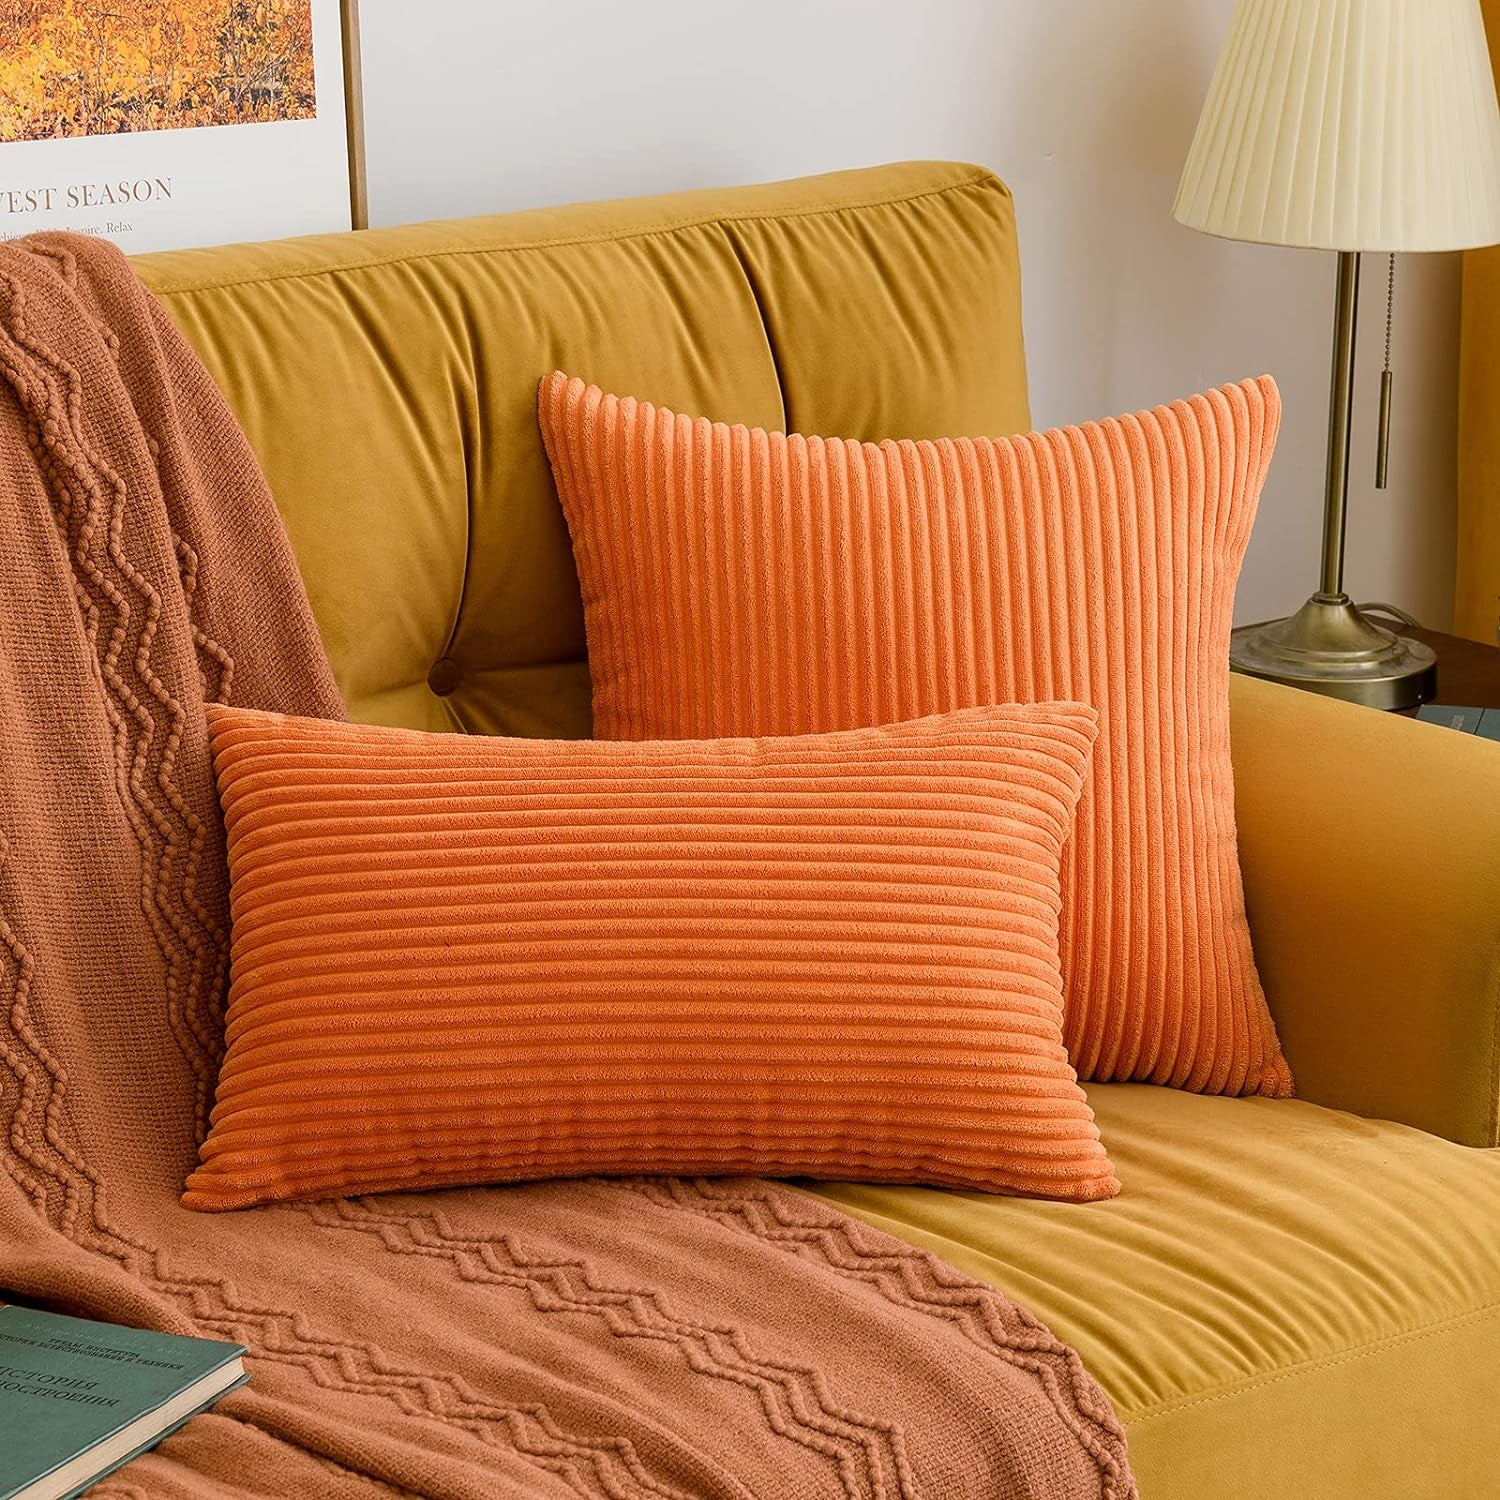 Pack of 2 Orange Pillow Covers 18X18 Inch Soft Boho Striped Corduroy Throw Pillow Covers Set Decorative Square Cushion Cases Pillowcases for Sofa Bedroom Couch